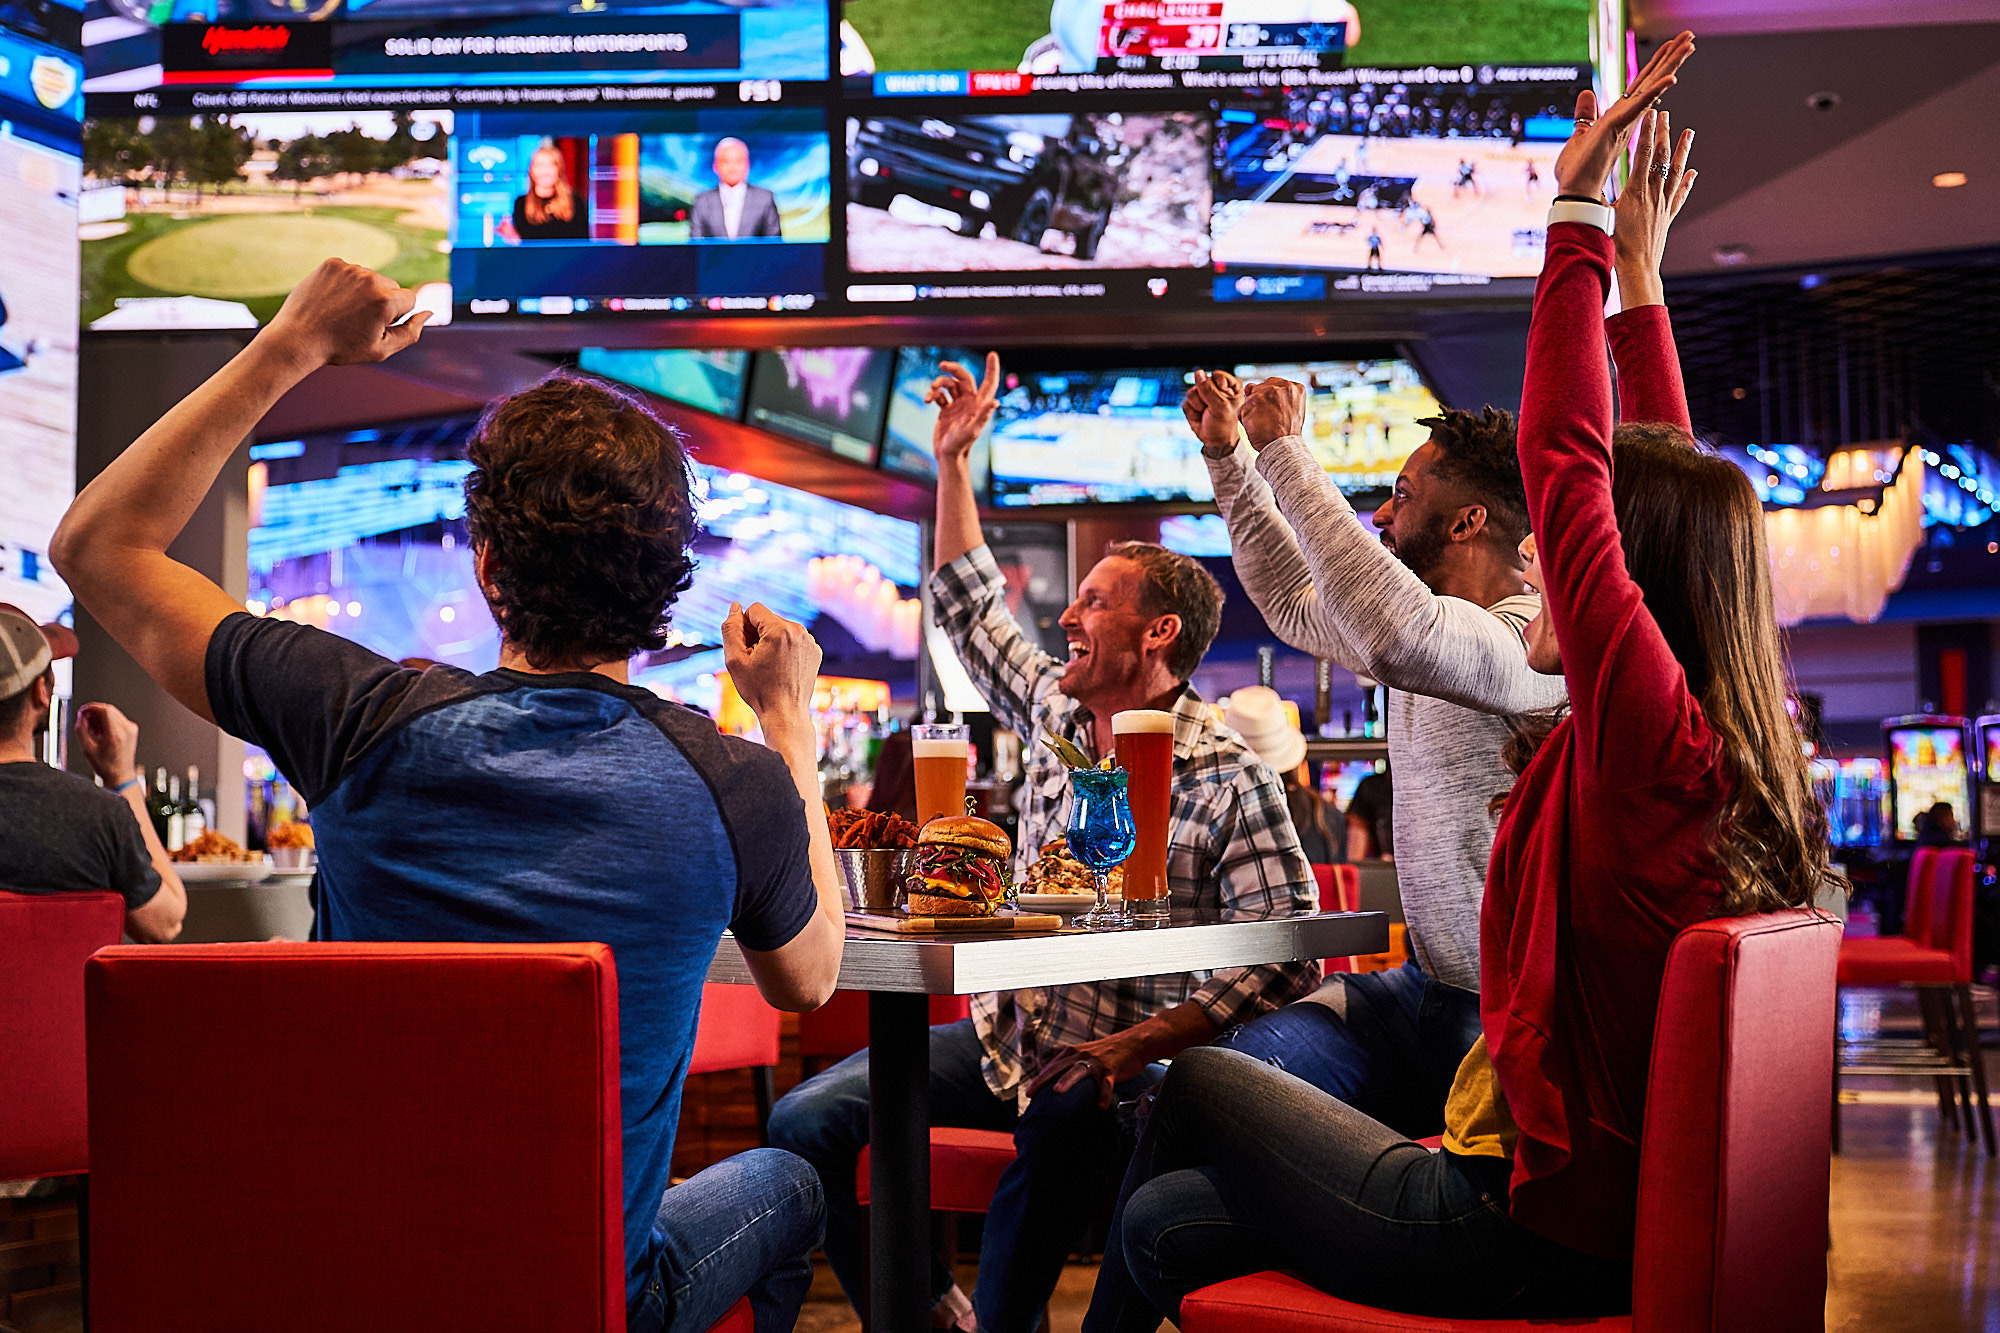 Sportsbook & Bar people watching a game